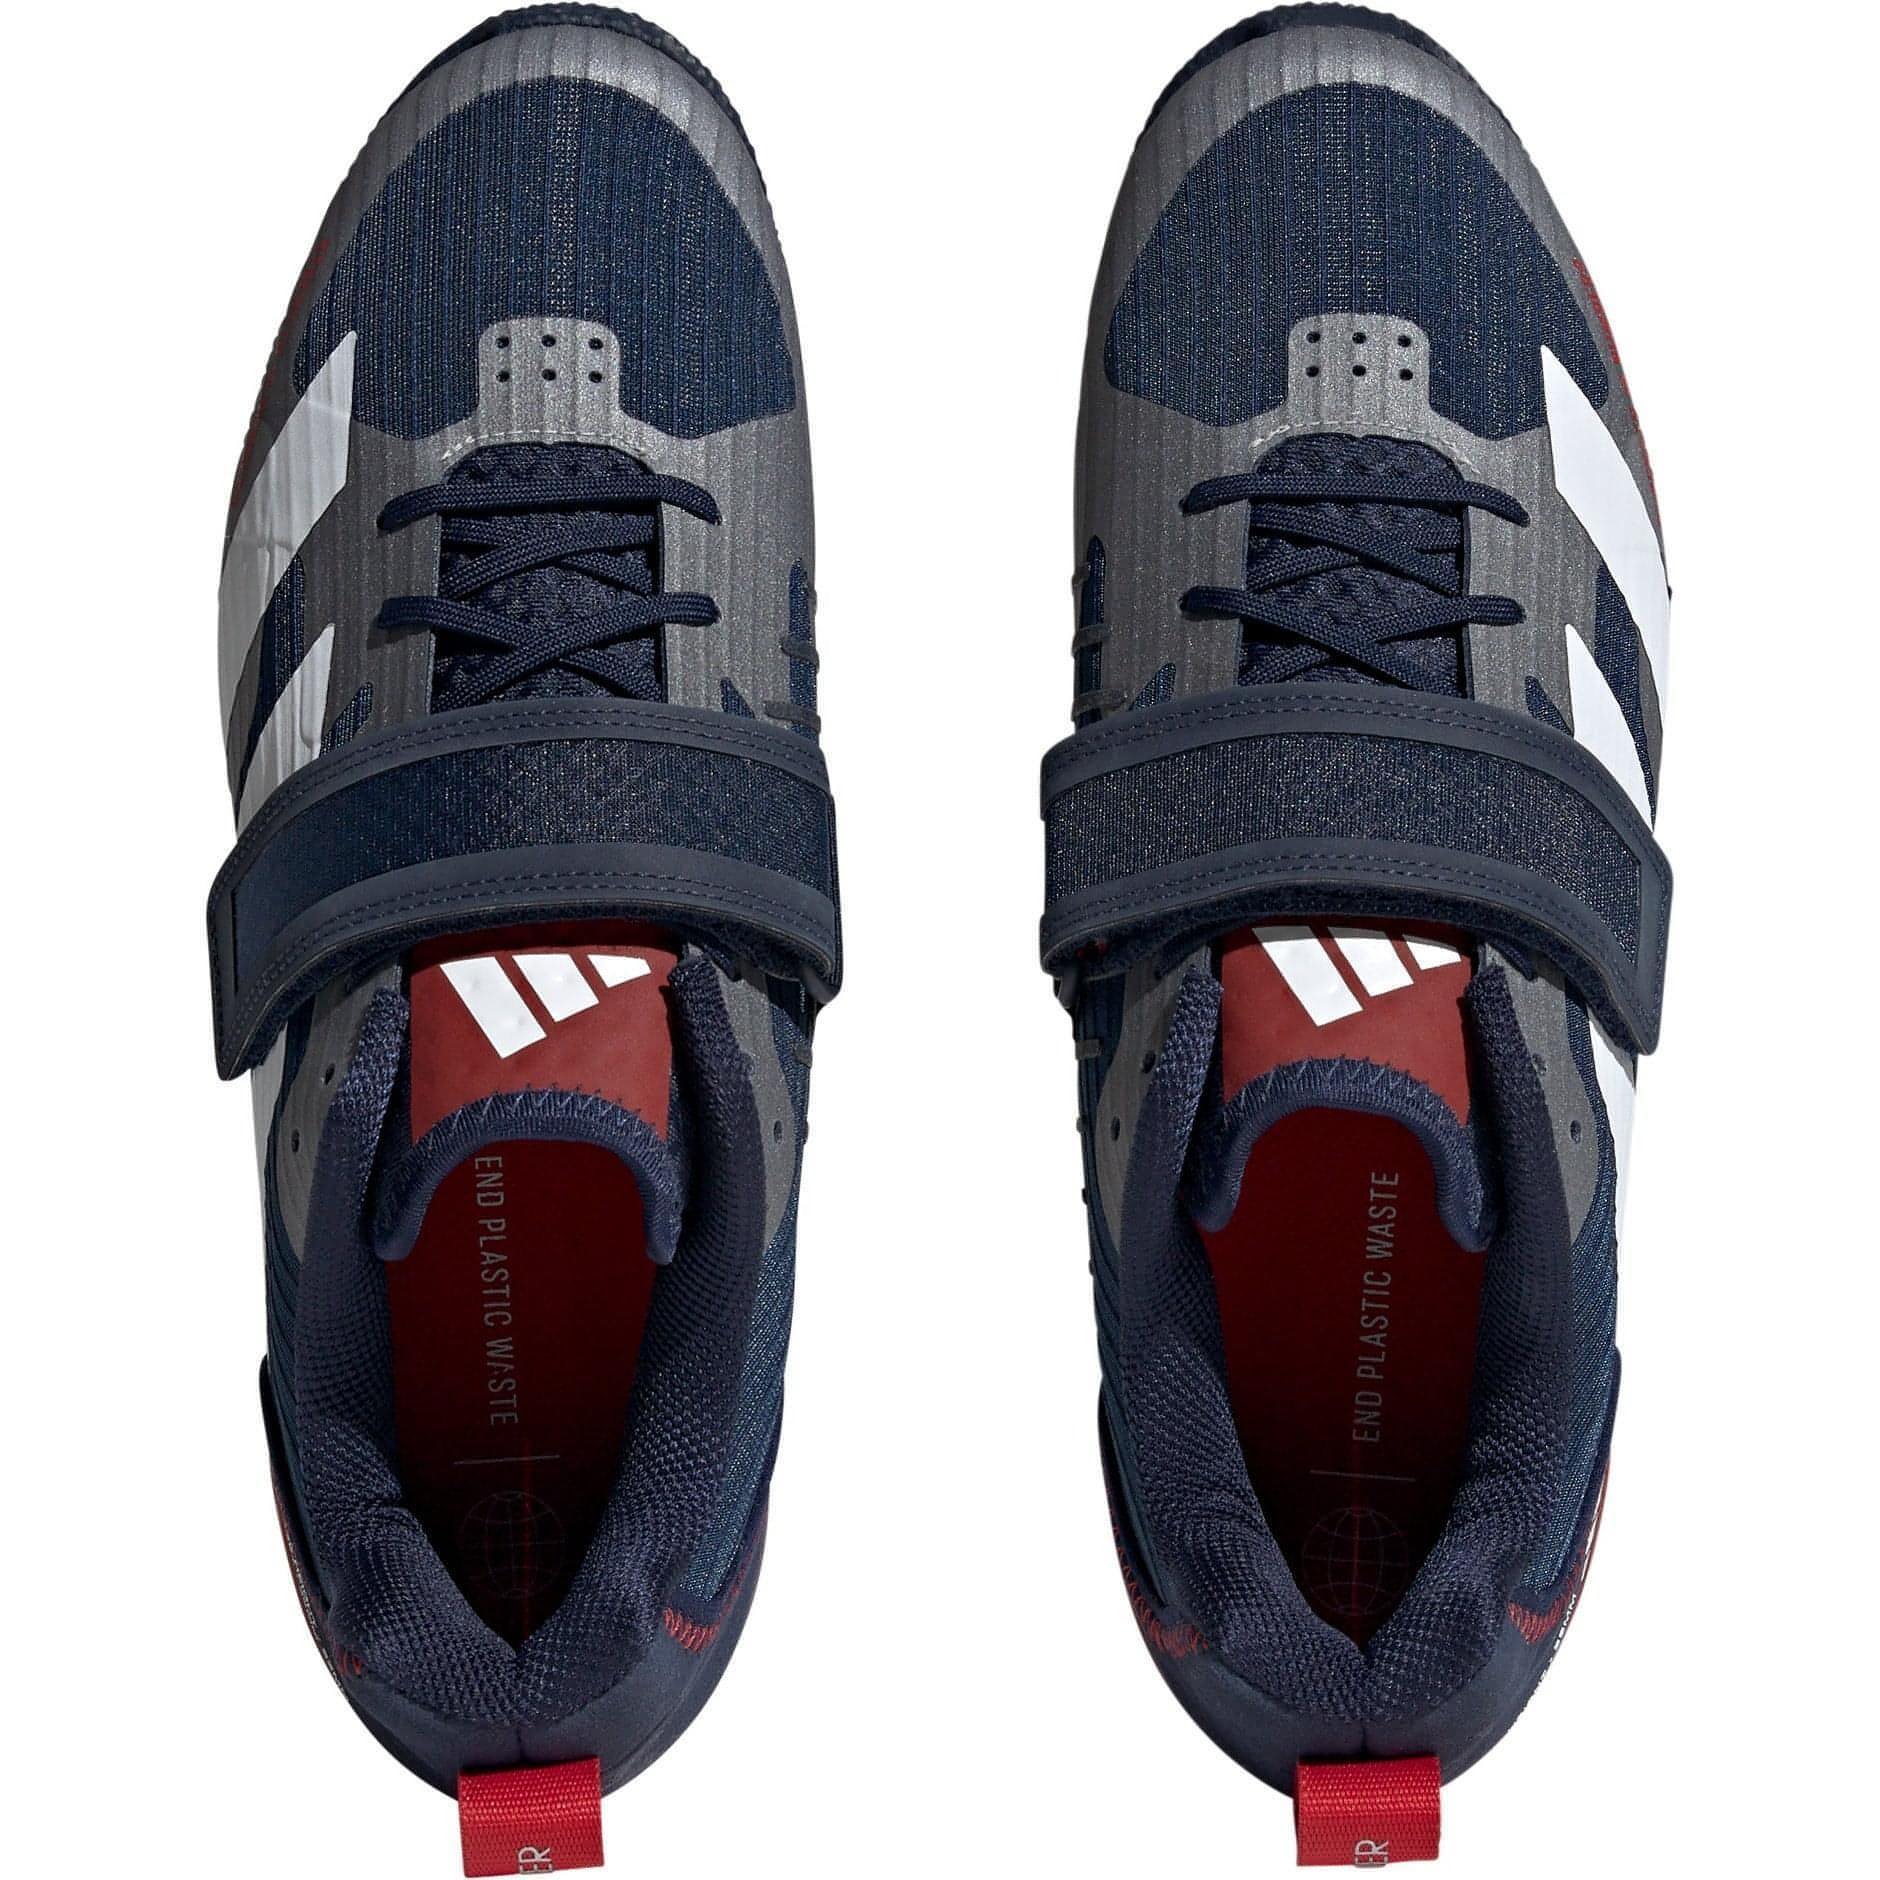 Adidas Adipower Weightlifting Shoes Hq3527 Top